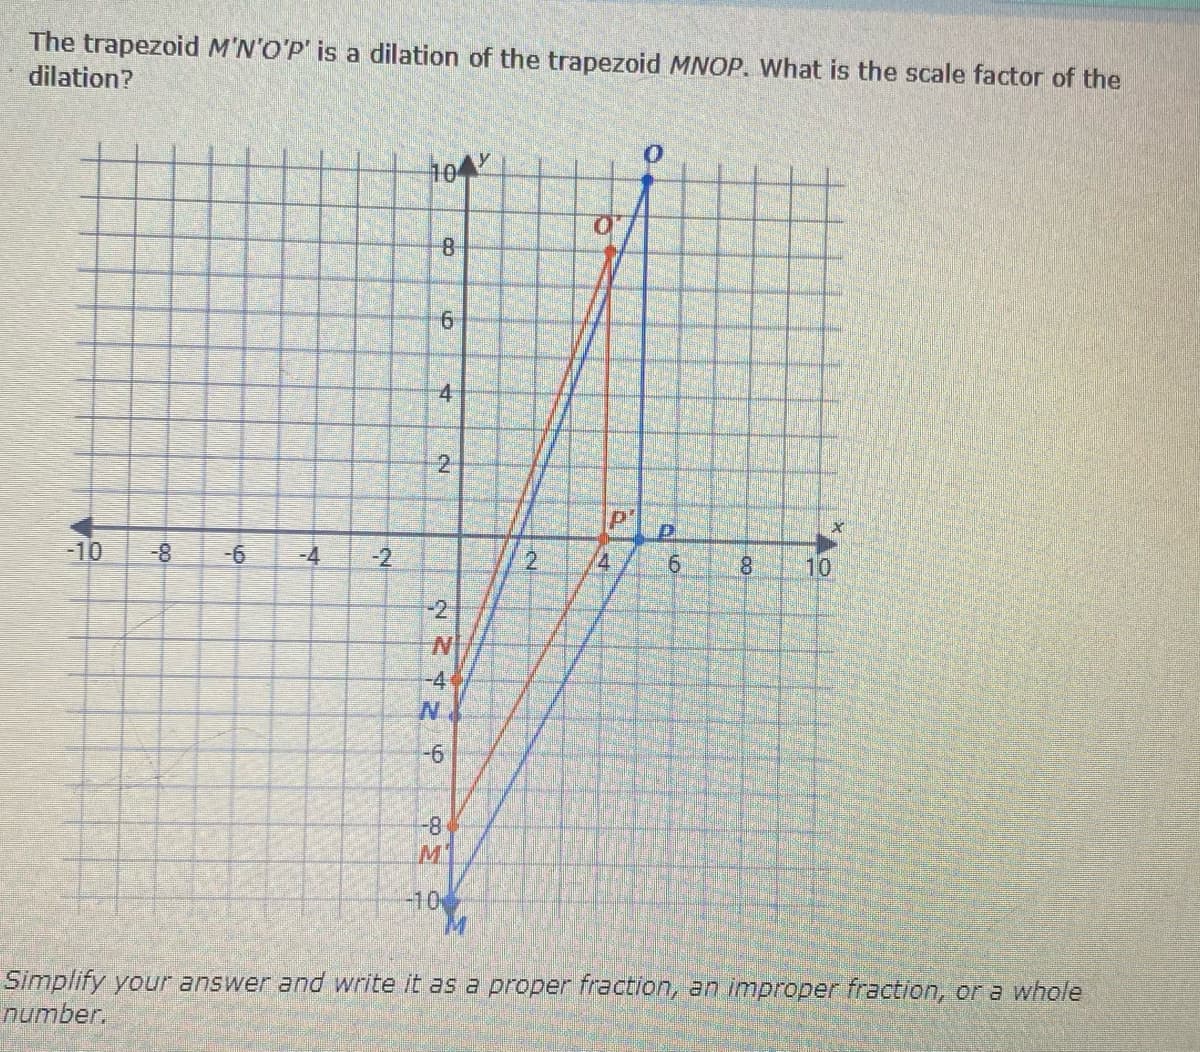 The trapezoid M'N'O'P' is a dilation of the trapezoid MNOP. What is the scale factor of the
dilation?
104
4
-10
-4
-2
2.
6.
8.
10
8-
-2
N'
-4
8-1
M'
-10
Simplify your answer and write it as a proper fraction, an improper fraction, or a whole
number.
2.
2.
6.
